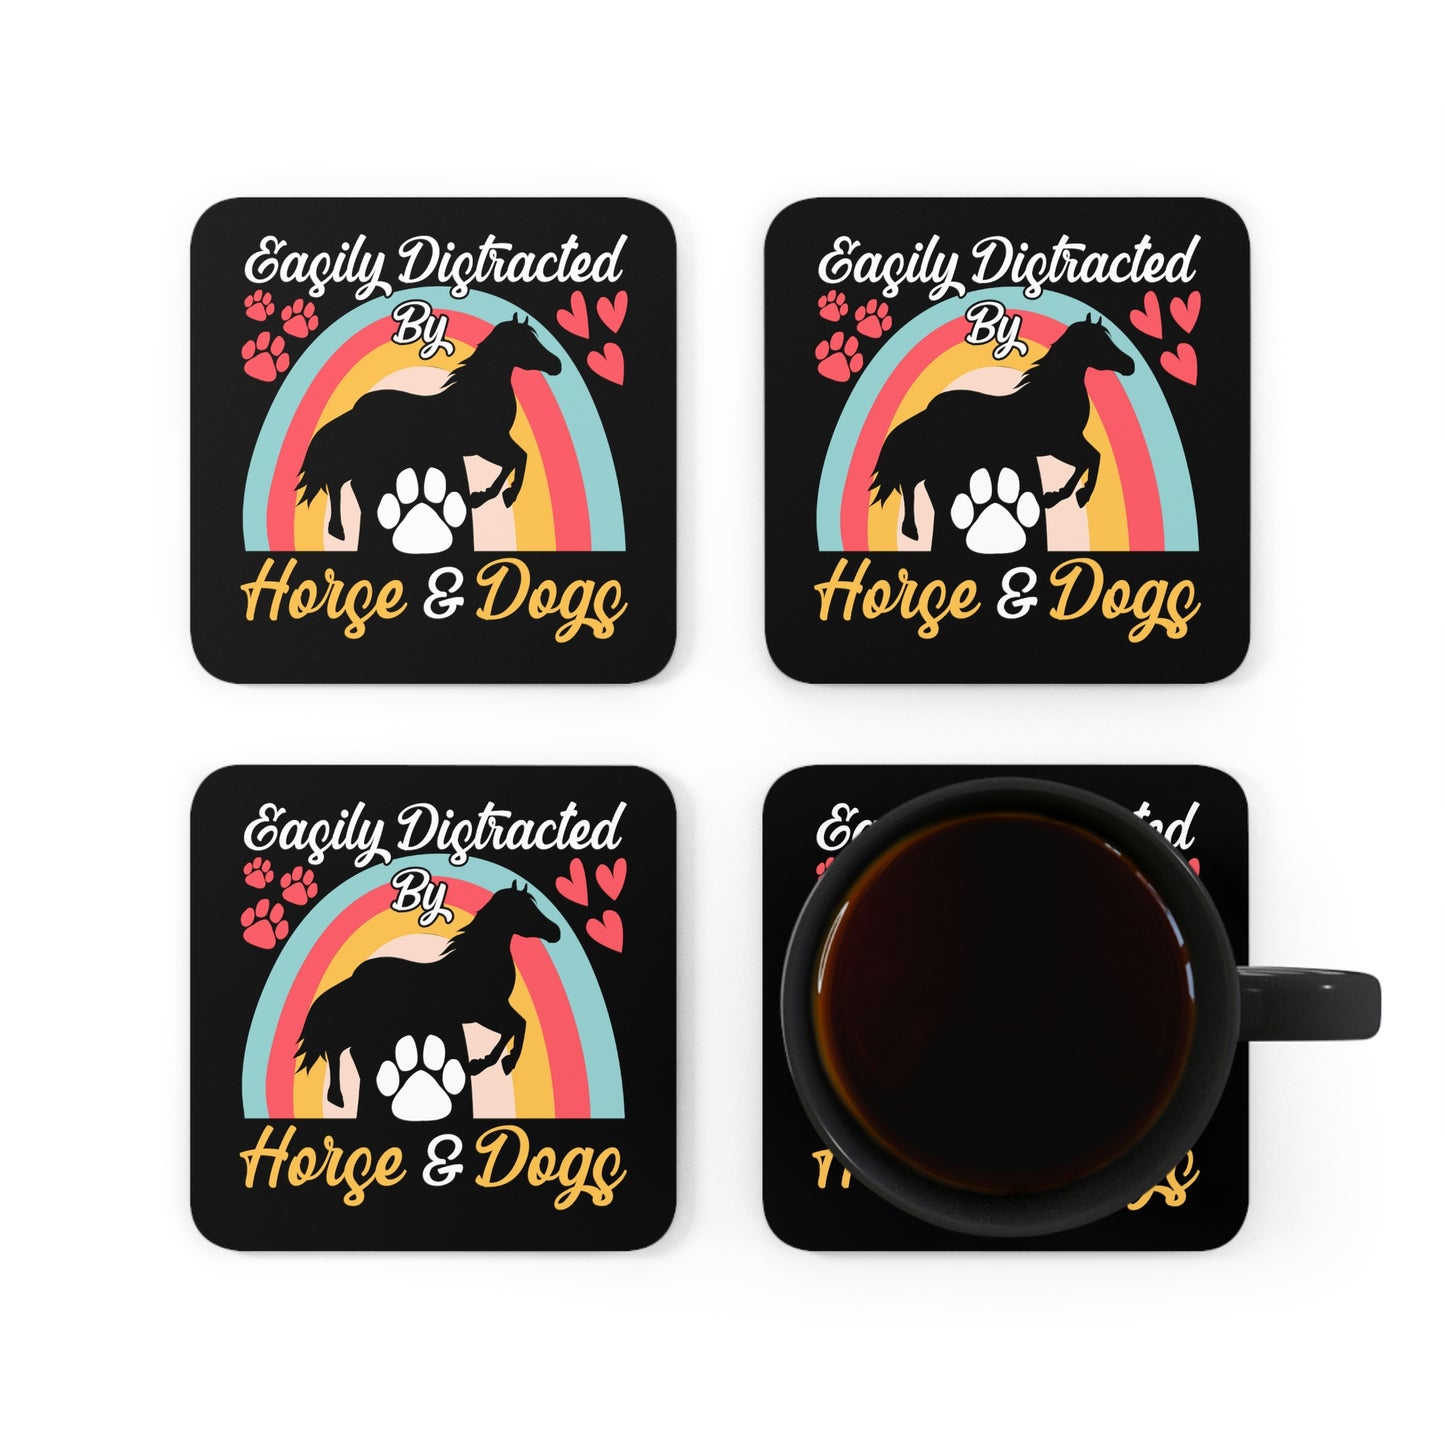 Easily Distracted by Horse & Dogs Corkwood Coaster Set